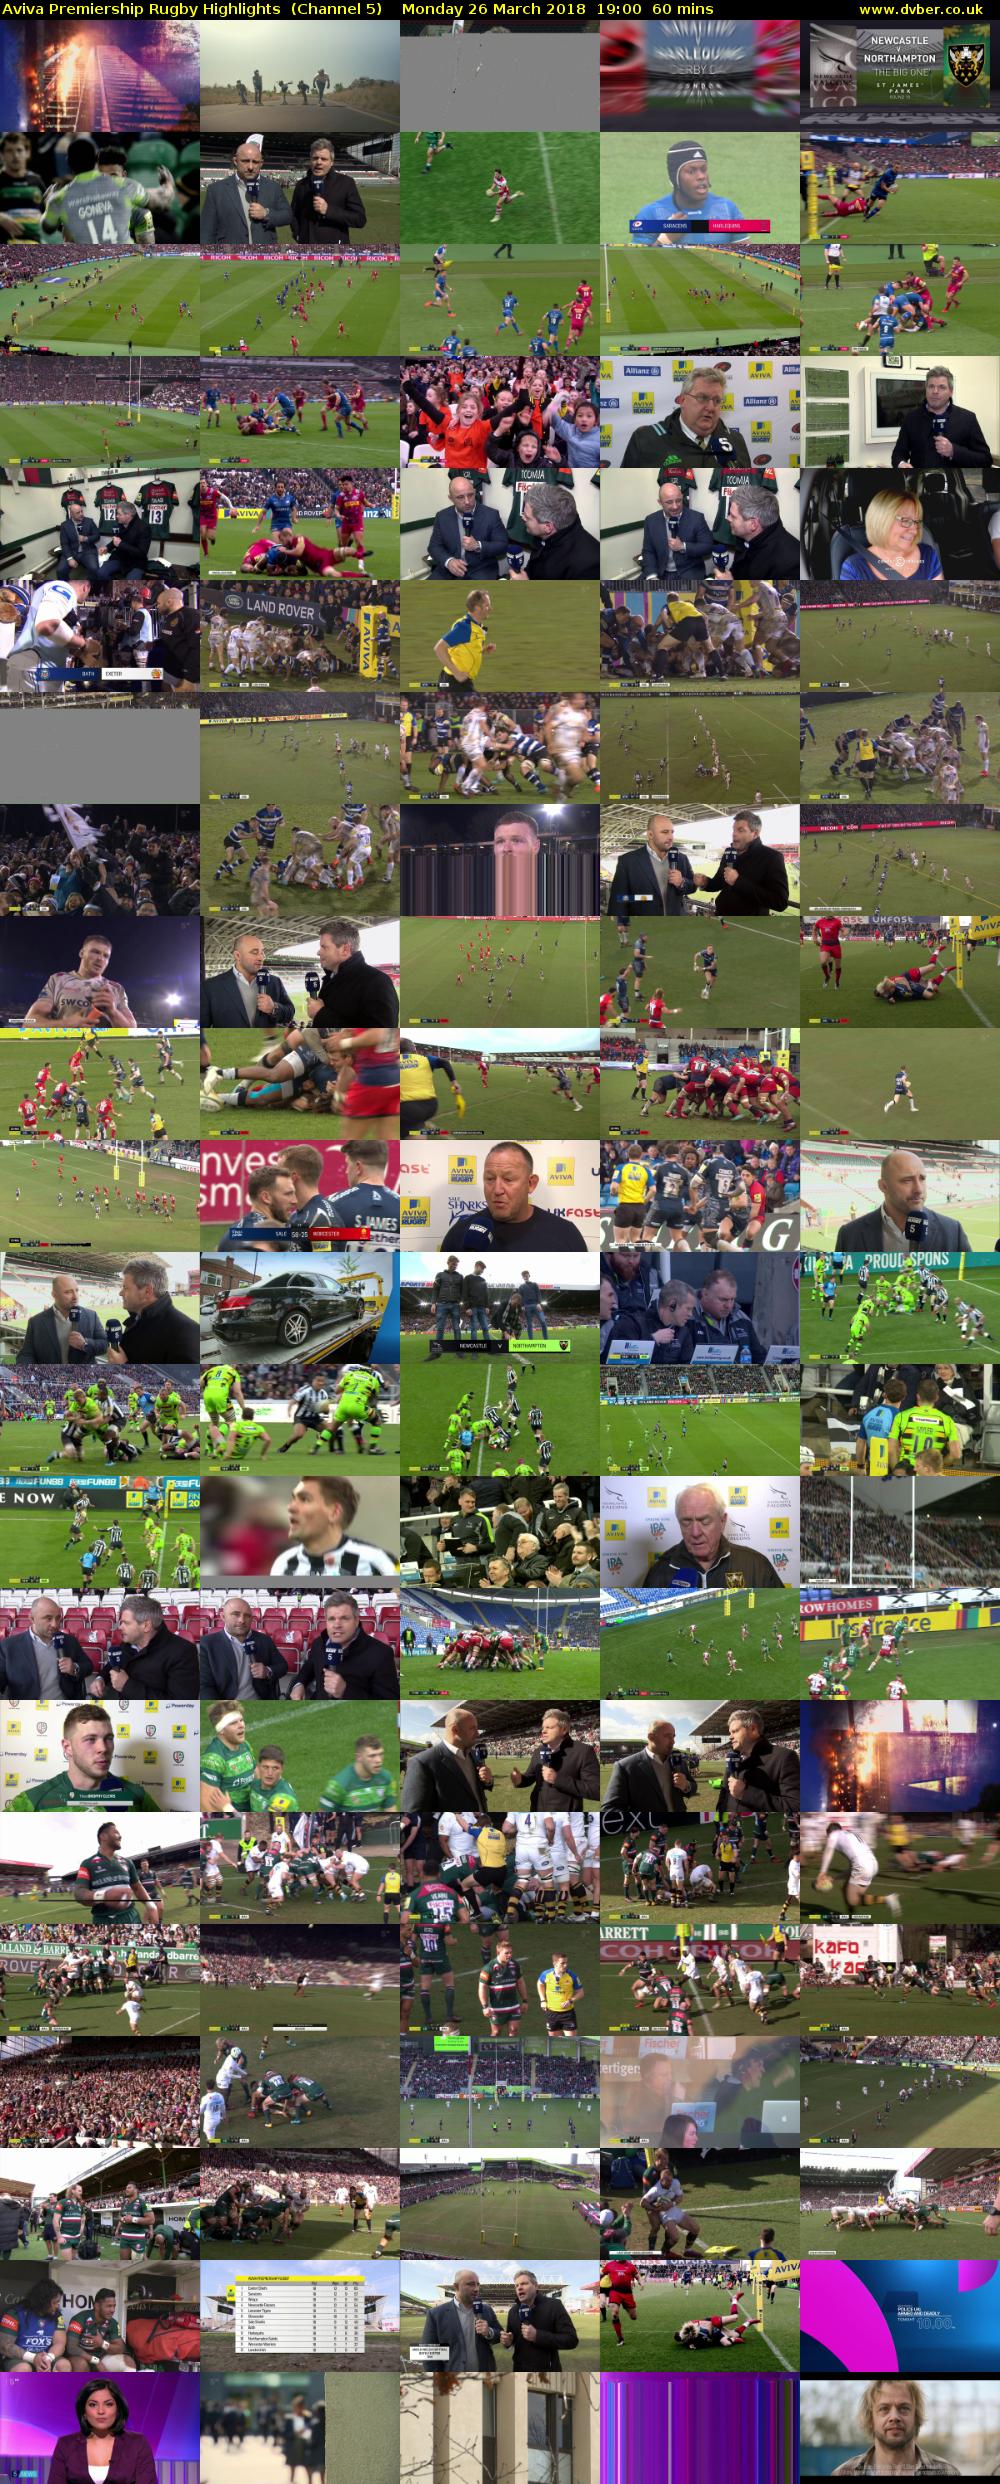 Aviva Premiership Rugby Highlights  (Channel 5) Monday 26 March 2018 19:00 - 20:00